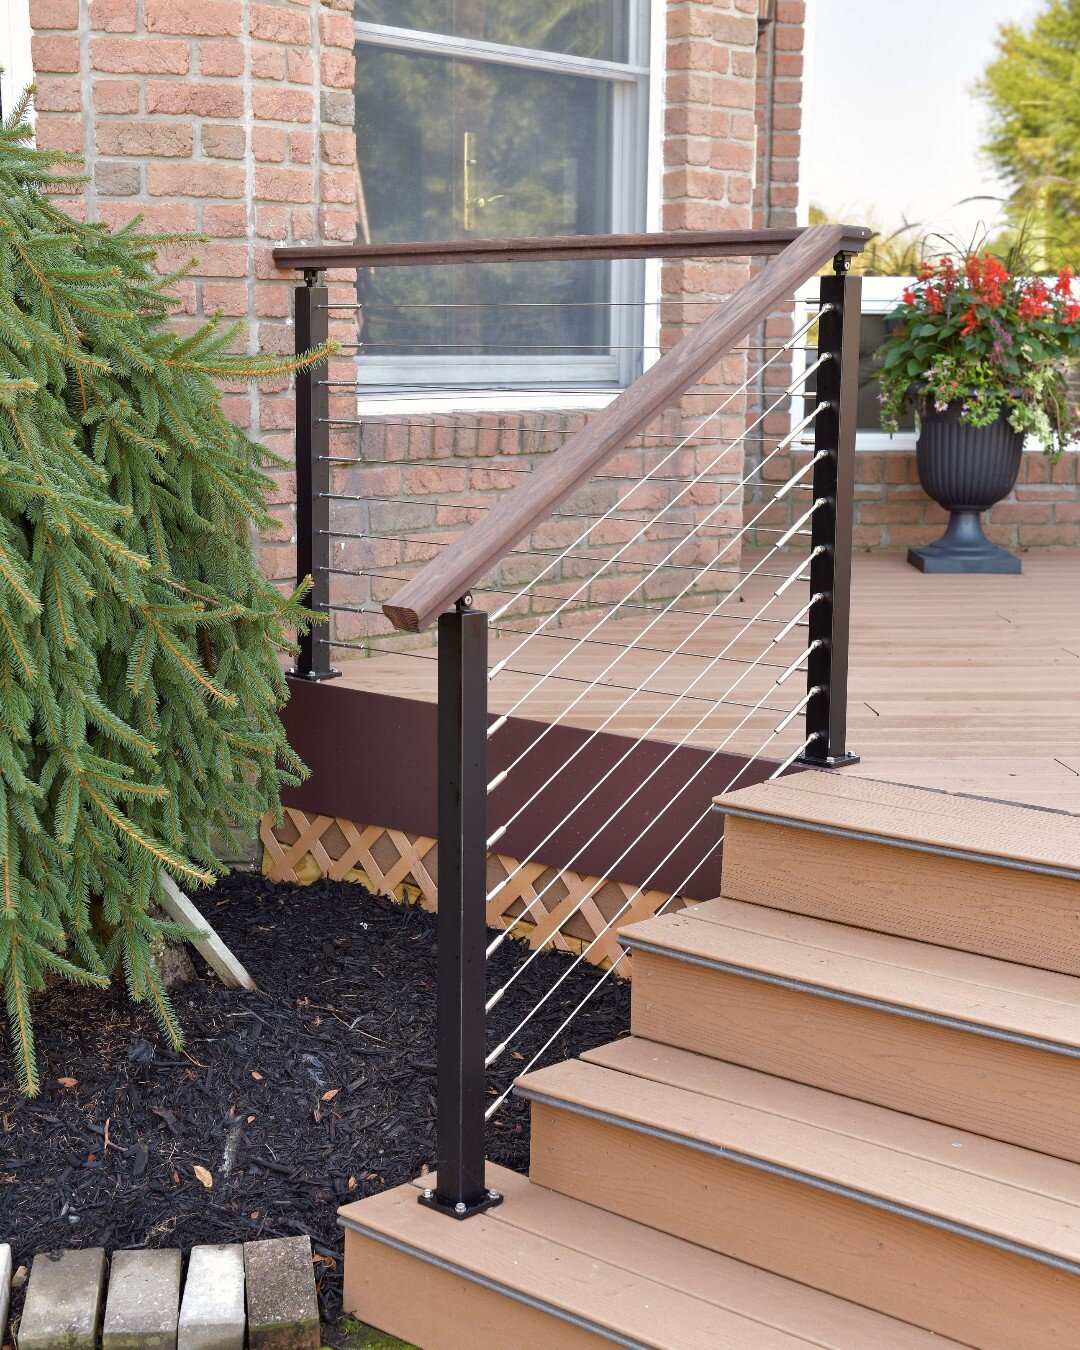 Our Linear Cable System is the perfect solution for creating a railing for your deck or patio without interrupting the view beyond.
-
#LJSmith #StairExperts #StairInspiration #CableSystem #CableRail #LoveTheRoom